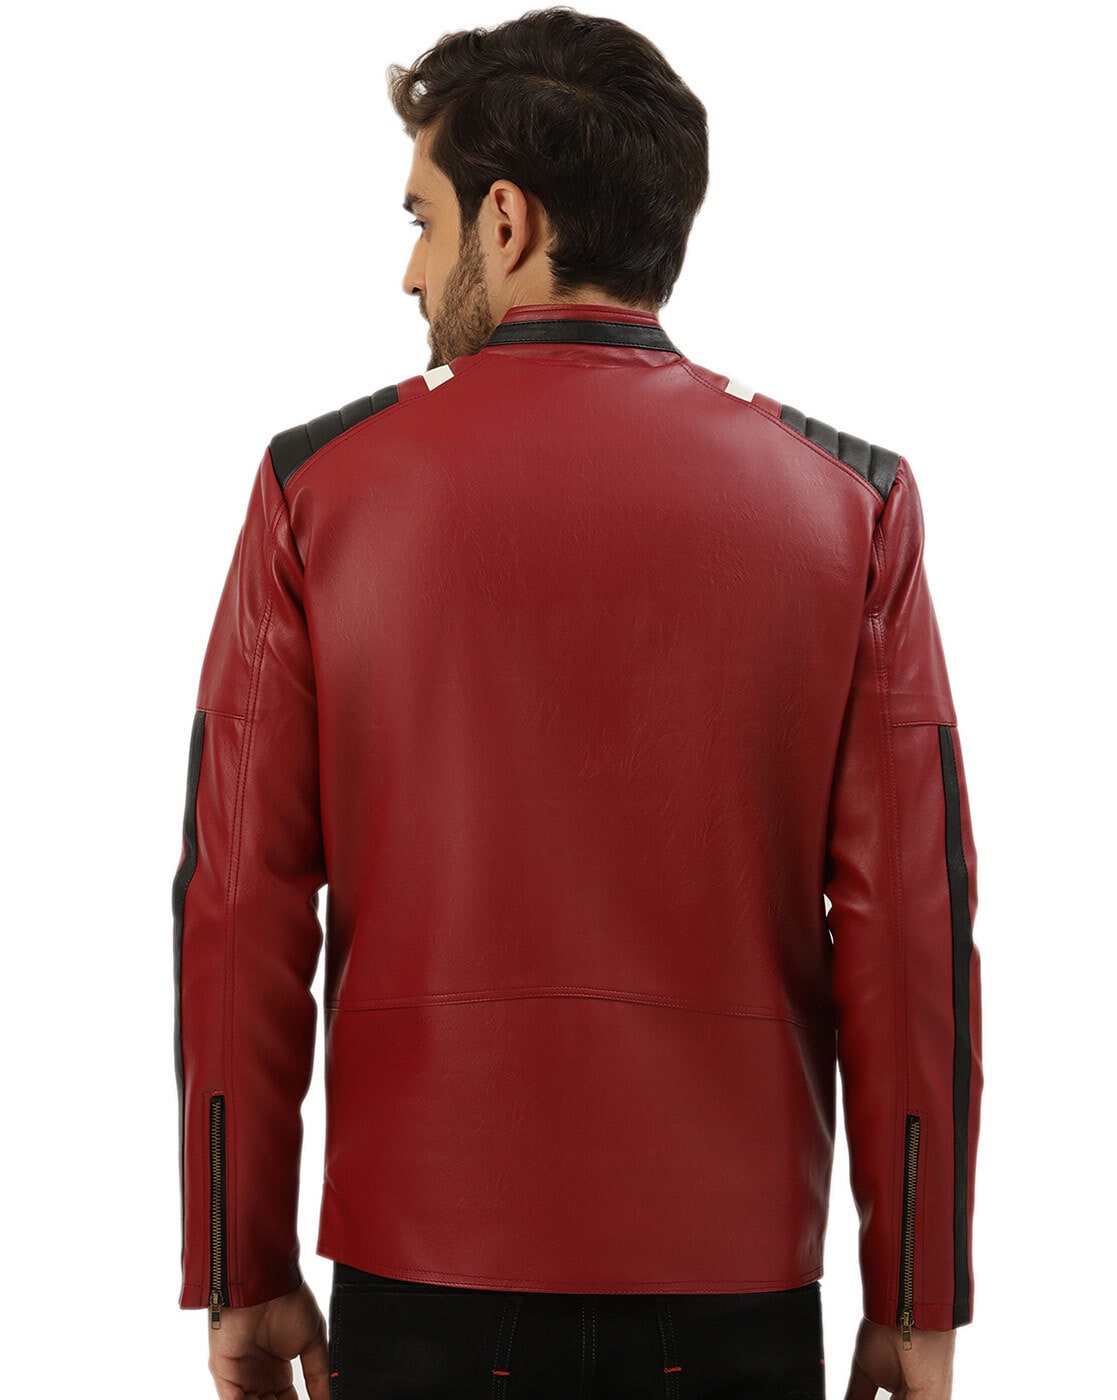 Hood Crew Men's Pu Faux Leather Jacket with Removable Hood Red L -  Walmart.com